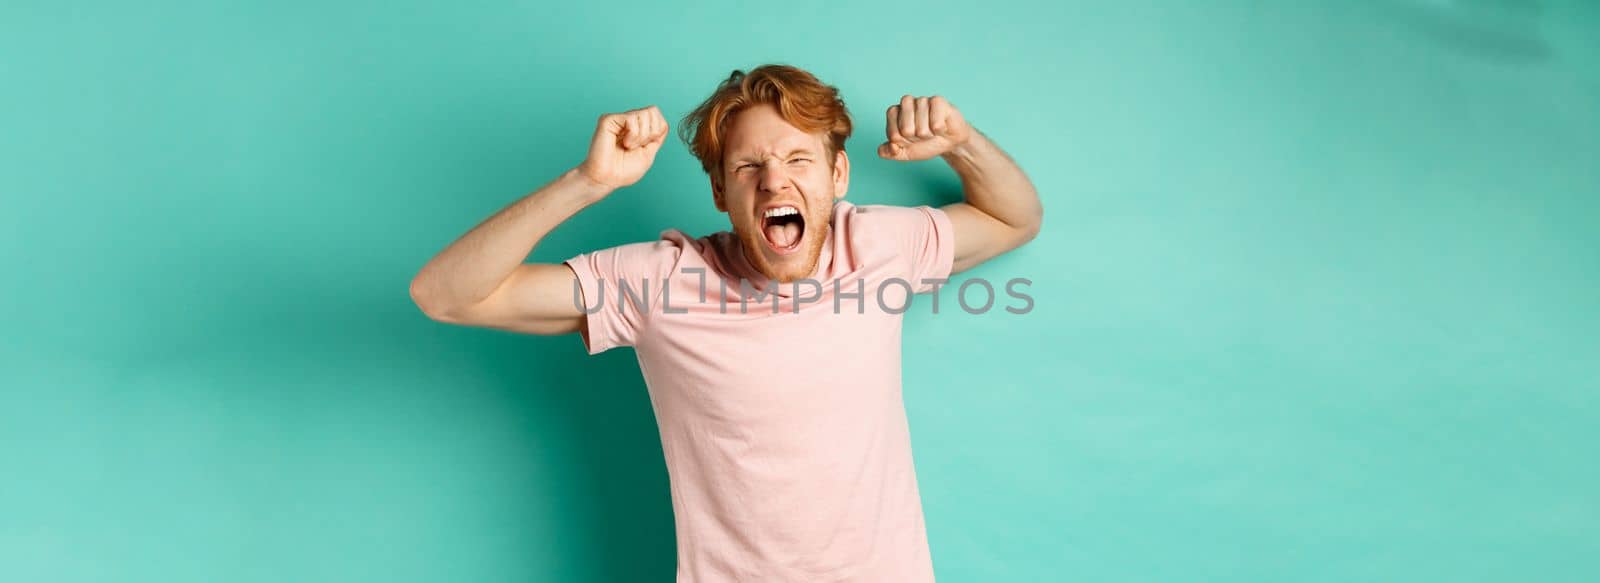 Redhead male fan watching sport game and cheering, shouting and making fist pumps, looking at camera, watching competition, rooting for team, standing over turquoise background.